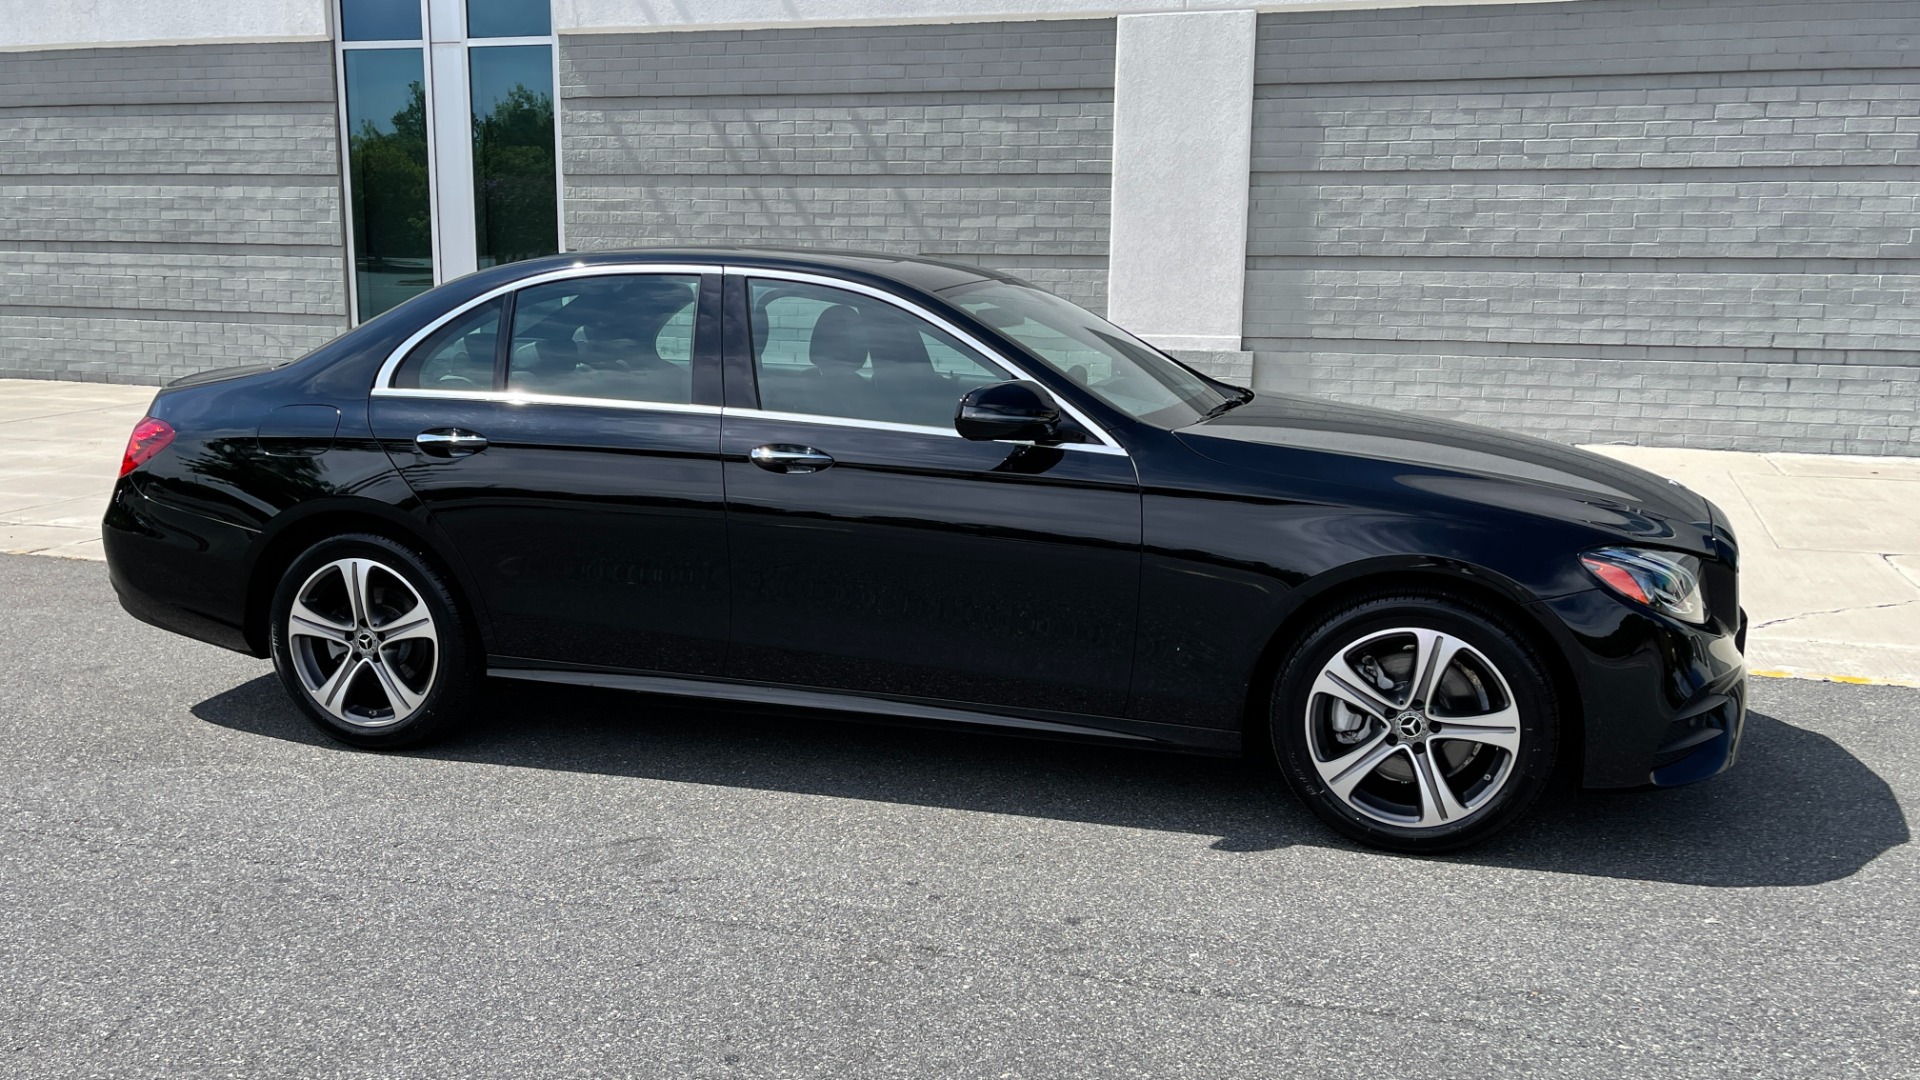 Used 2019 Mercedes-Benz E-Class E300 / 4MATIC / BURMESTER SOUND / PREMIUM PACKAGE / BLIND SPOT ASSIST for sale $39,395 at Formula Imports in Charlotte NC 28227 7